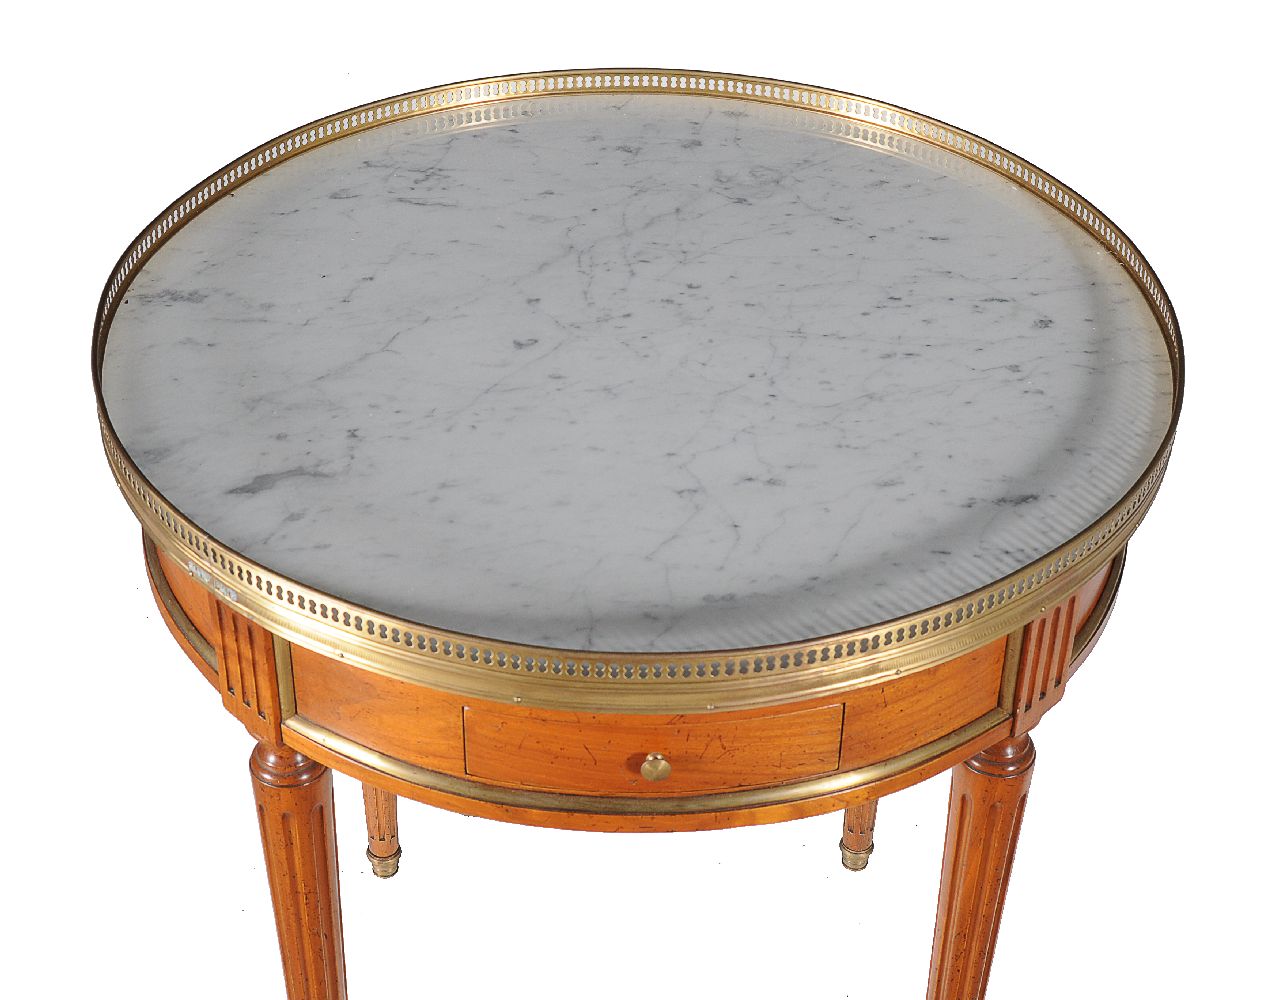 A walnut and marble topped gueridon table - Image 2 of 2